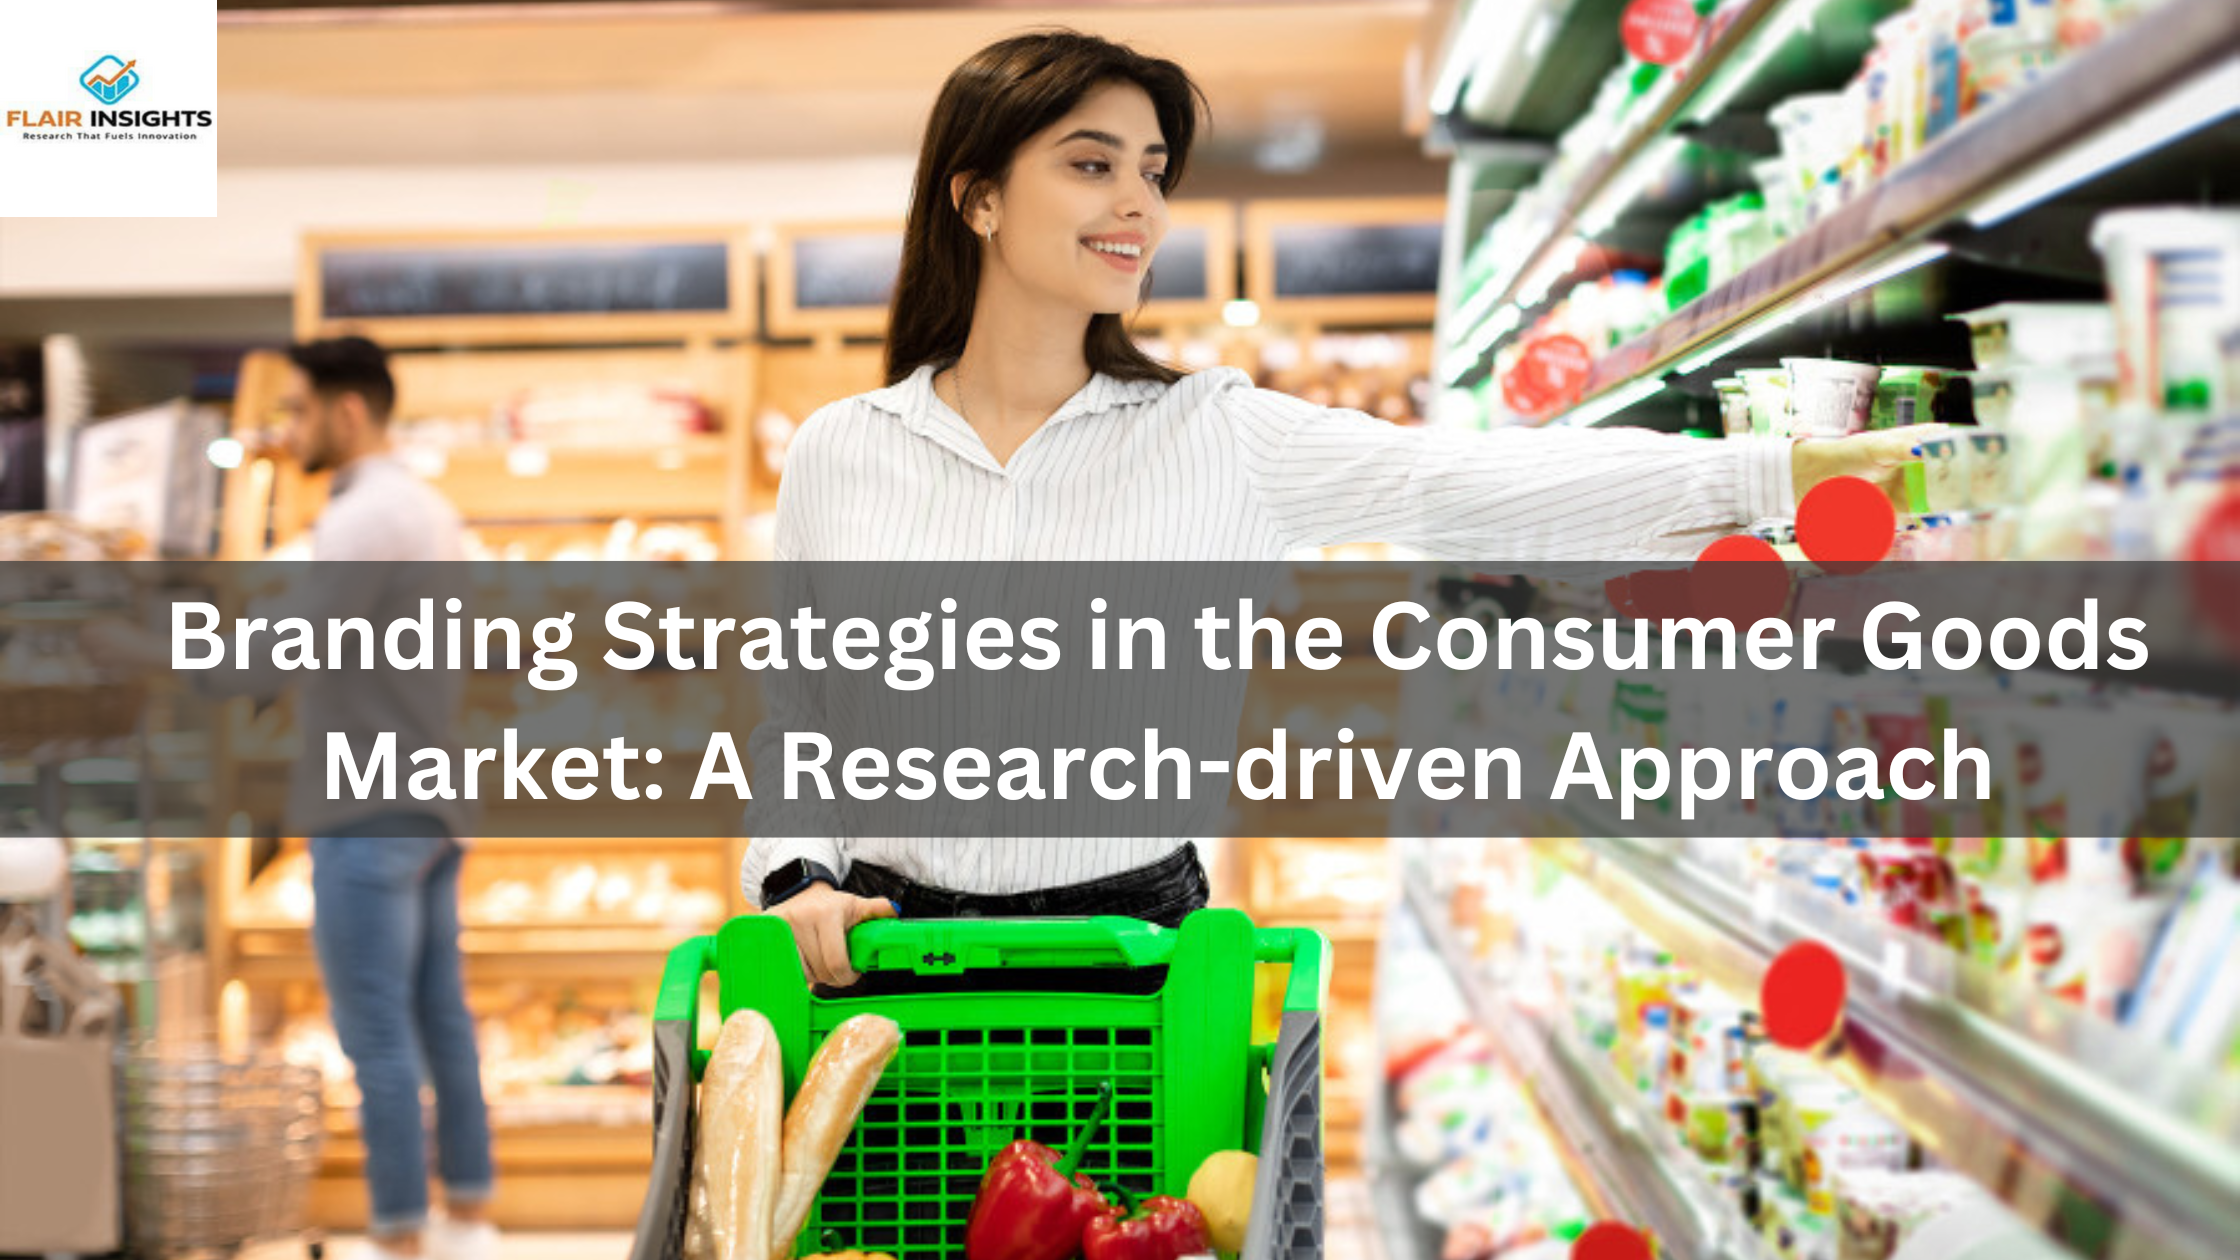 Branding Strategies in the Consumer Goods Market: A Research-driven Approach